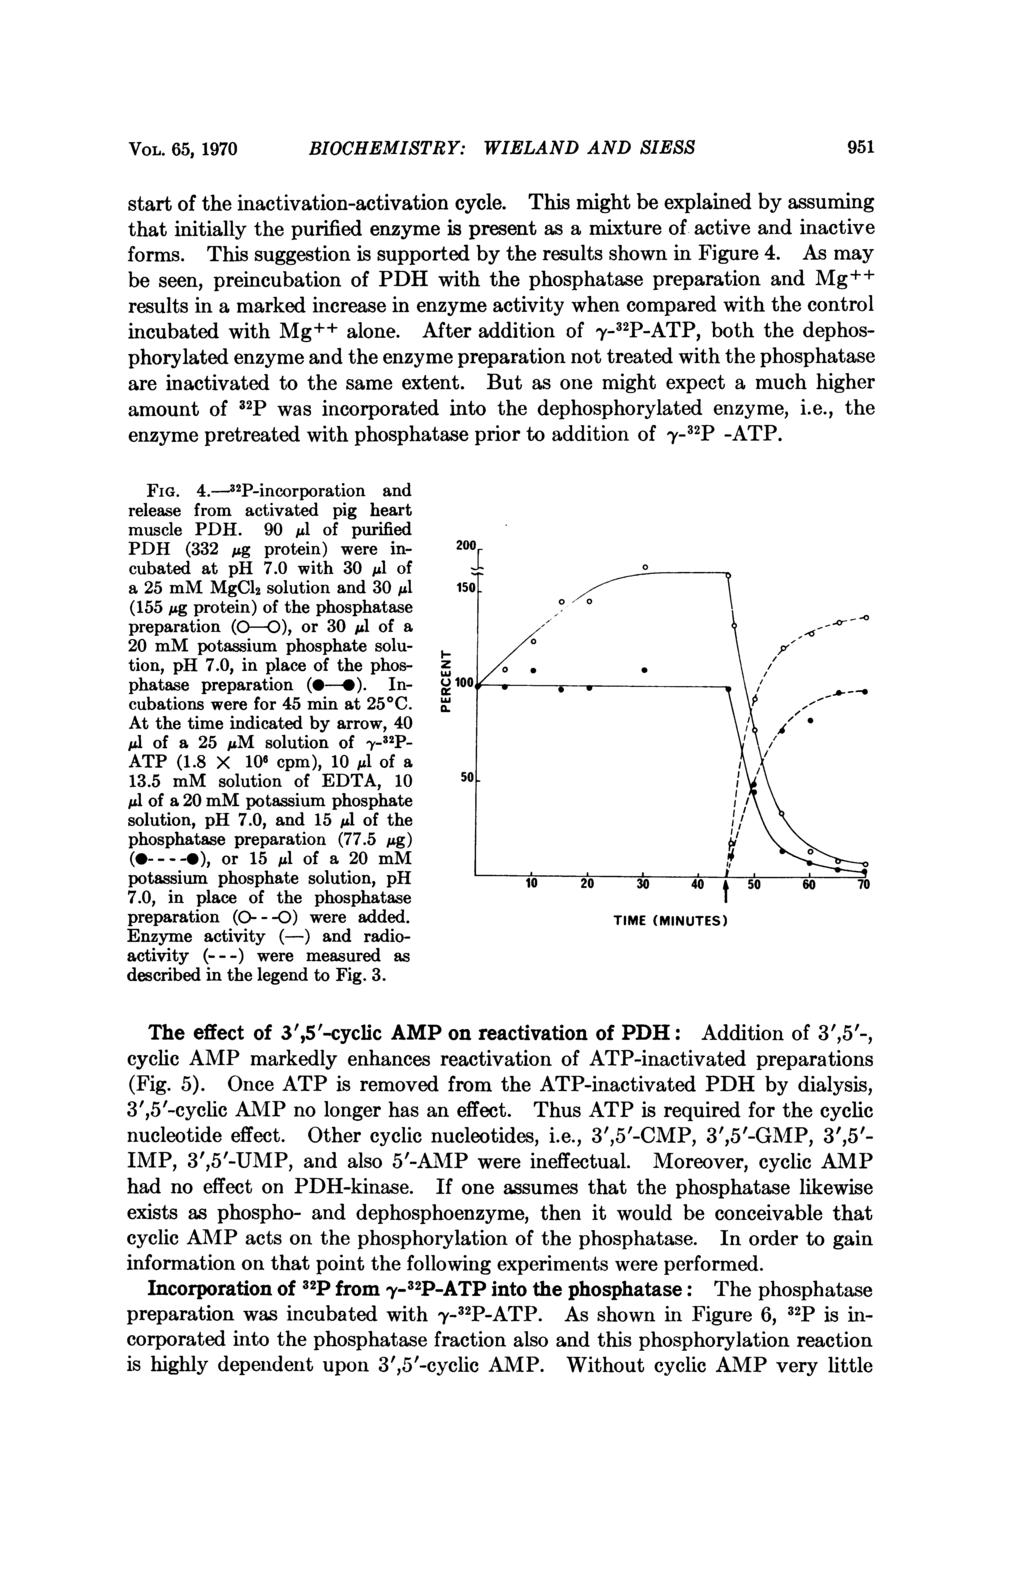 VOL. 65, 1970 BIOCHEMISTRY: WIELAND AND SIESS 951 start of the inactivation-activation cycle.